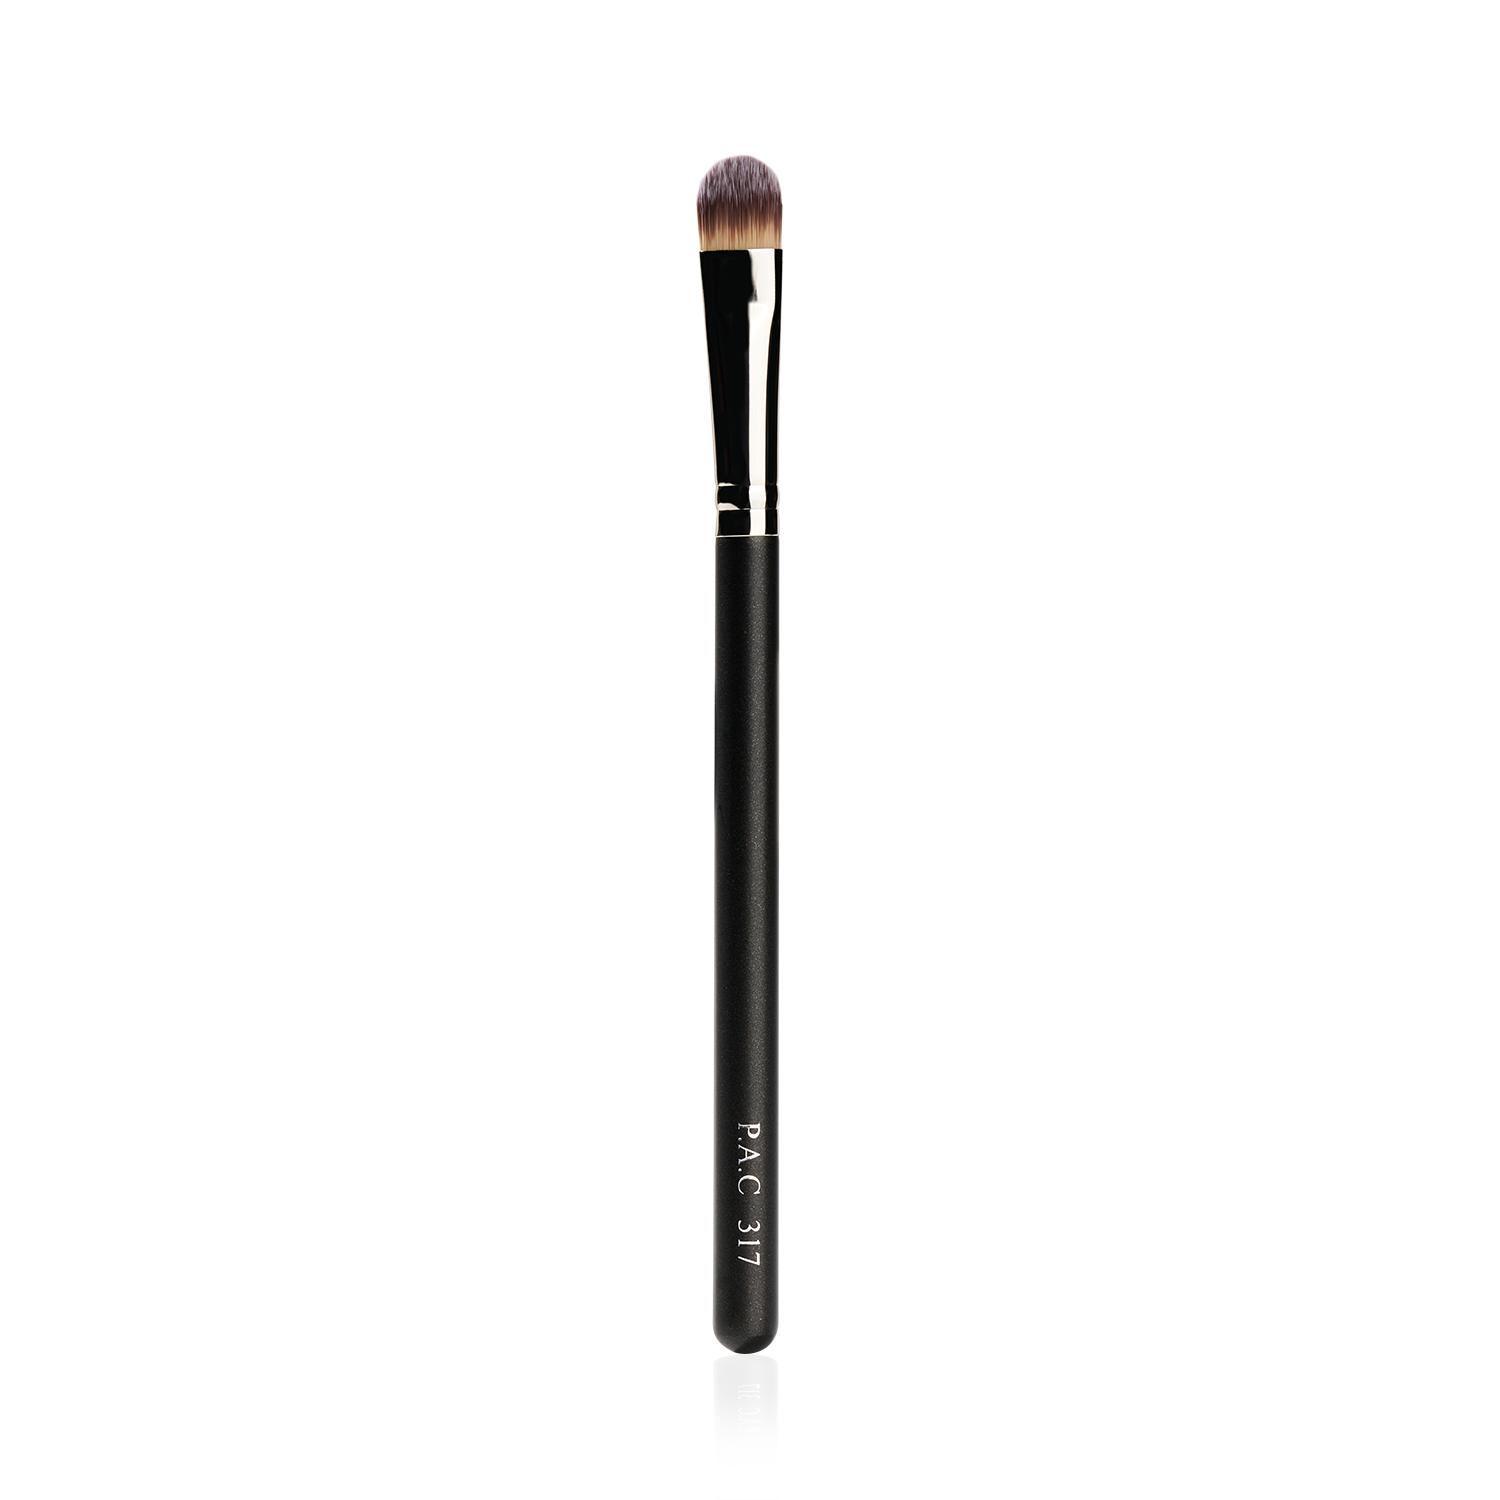 PAC | PAC Concealer Brush - 317 (1Pc)